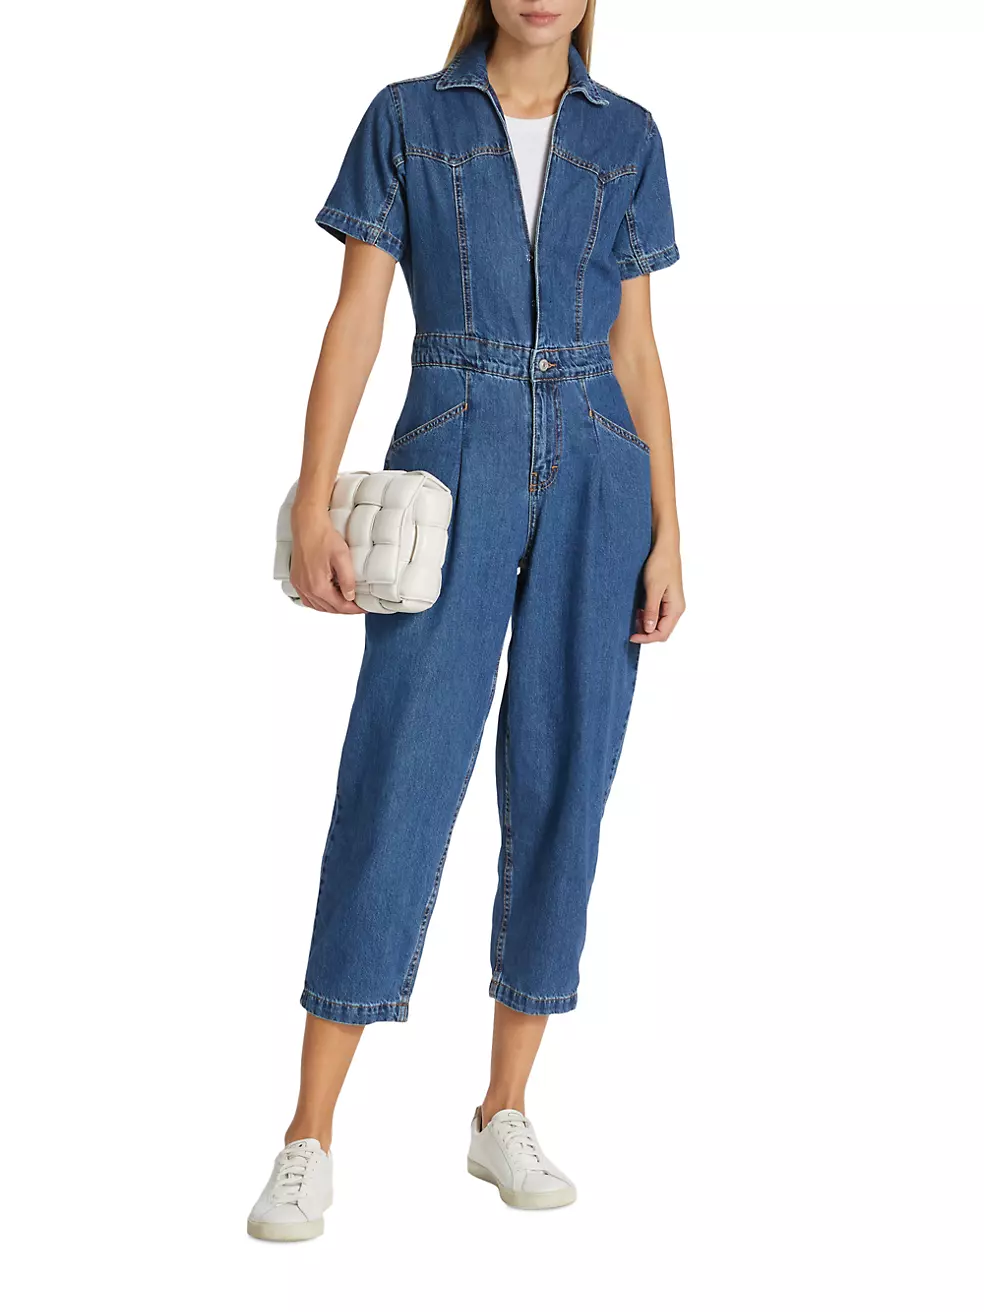 FREE PEOPLE Denim MARLA Coverall Jumpsuit – Silver Accents